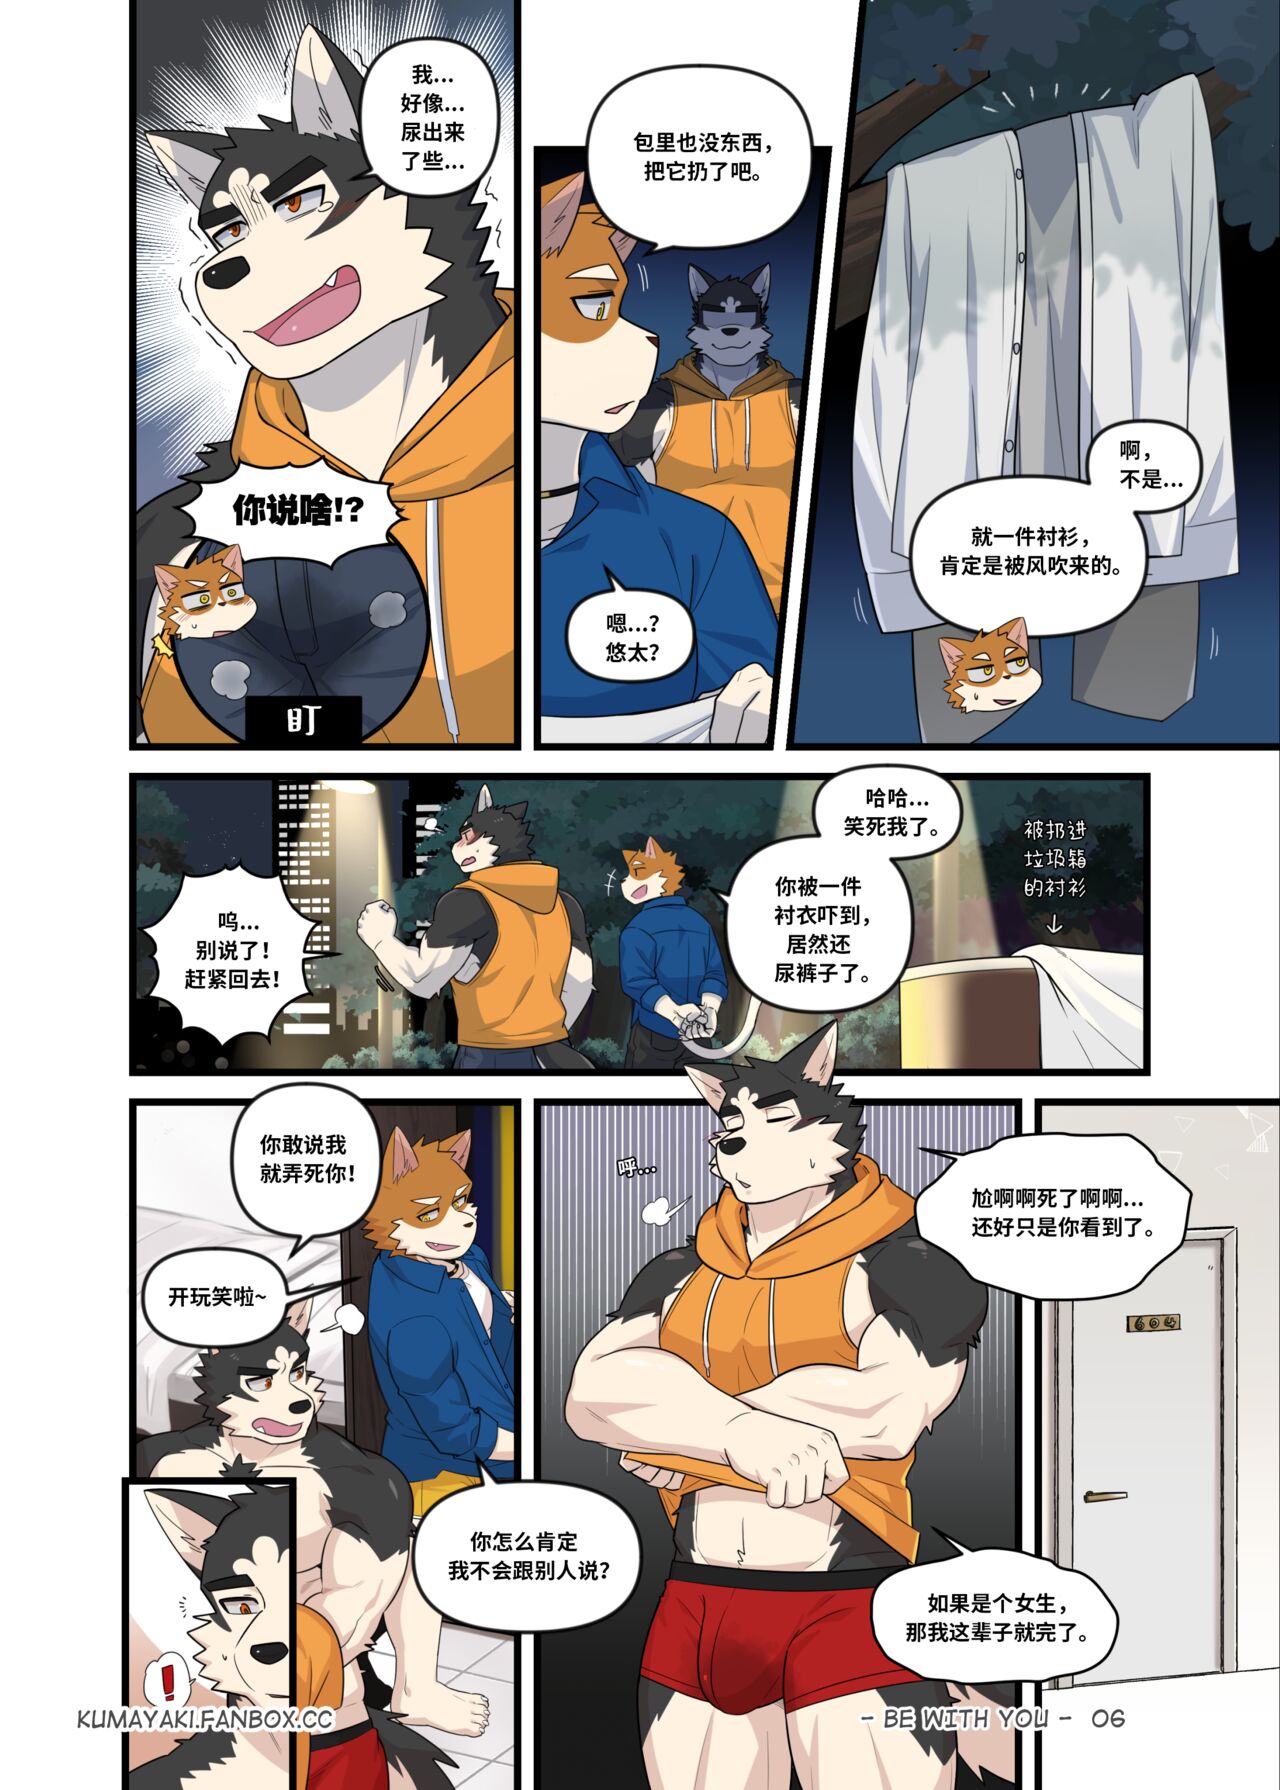 [Luwei] Be With You 狗大汉化 [Simplified Chinese] [Ongoing] 